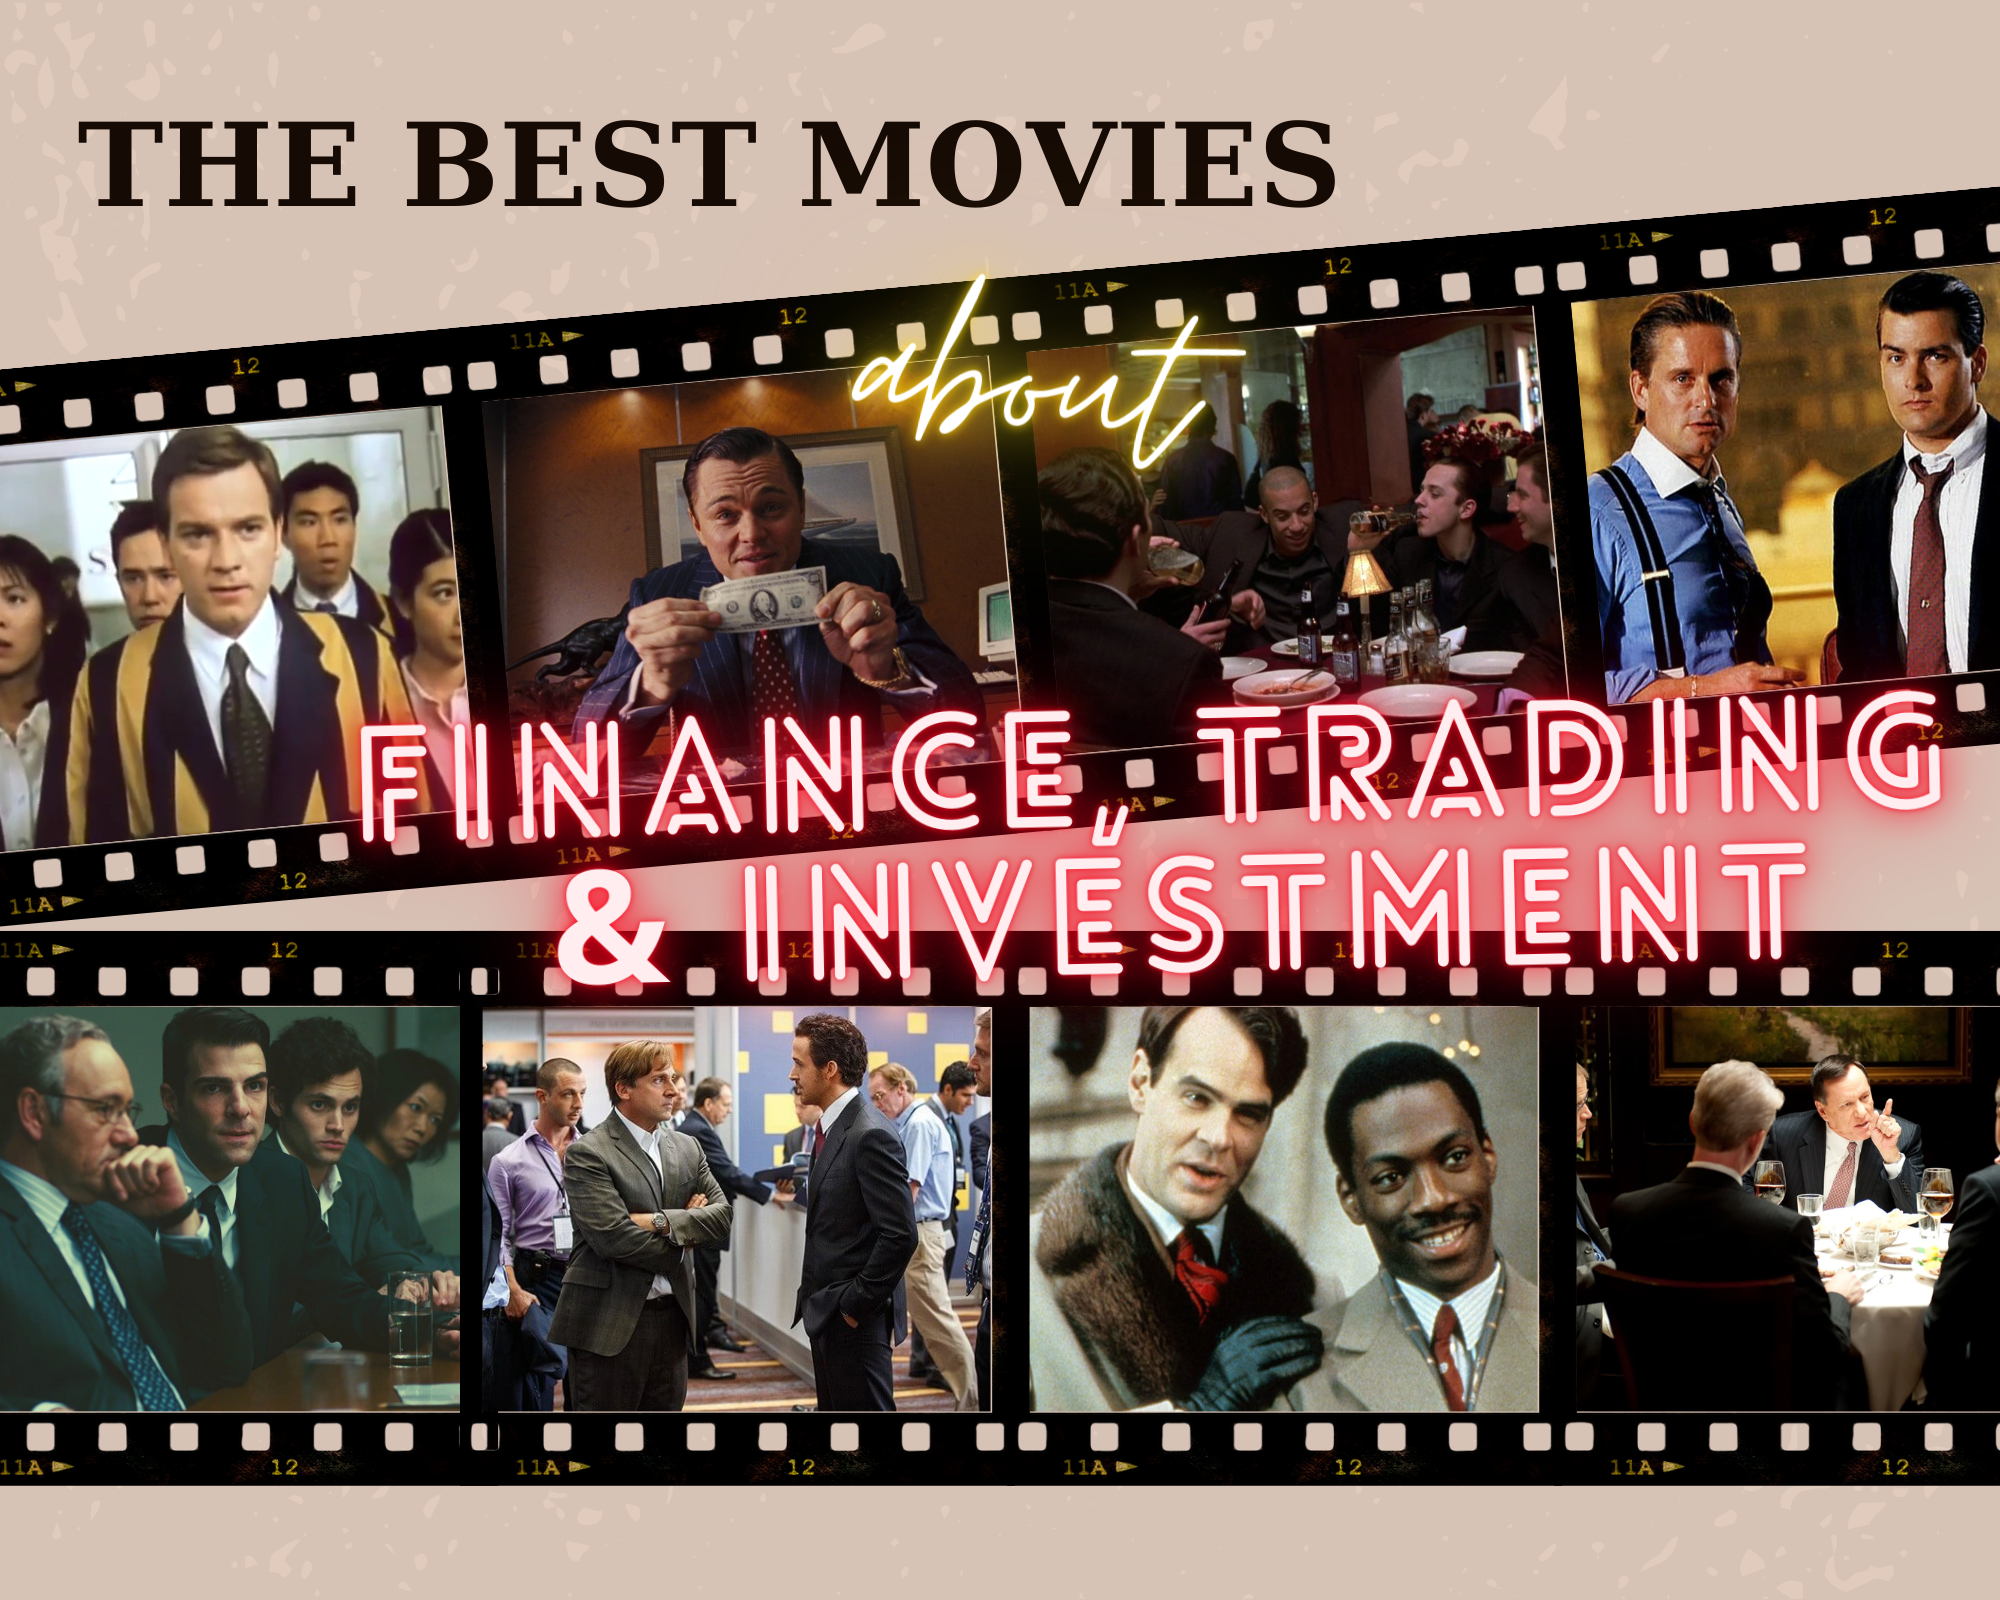 What to Watch? - Movies about Finance, Trade and Investment